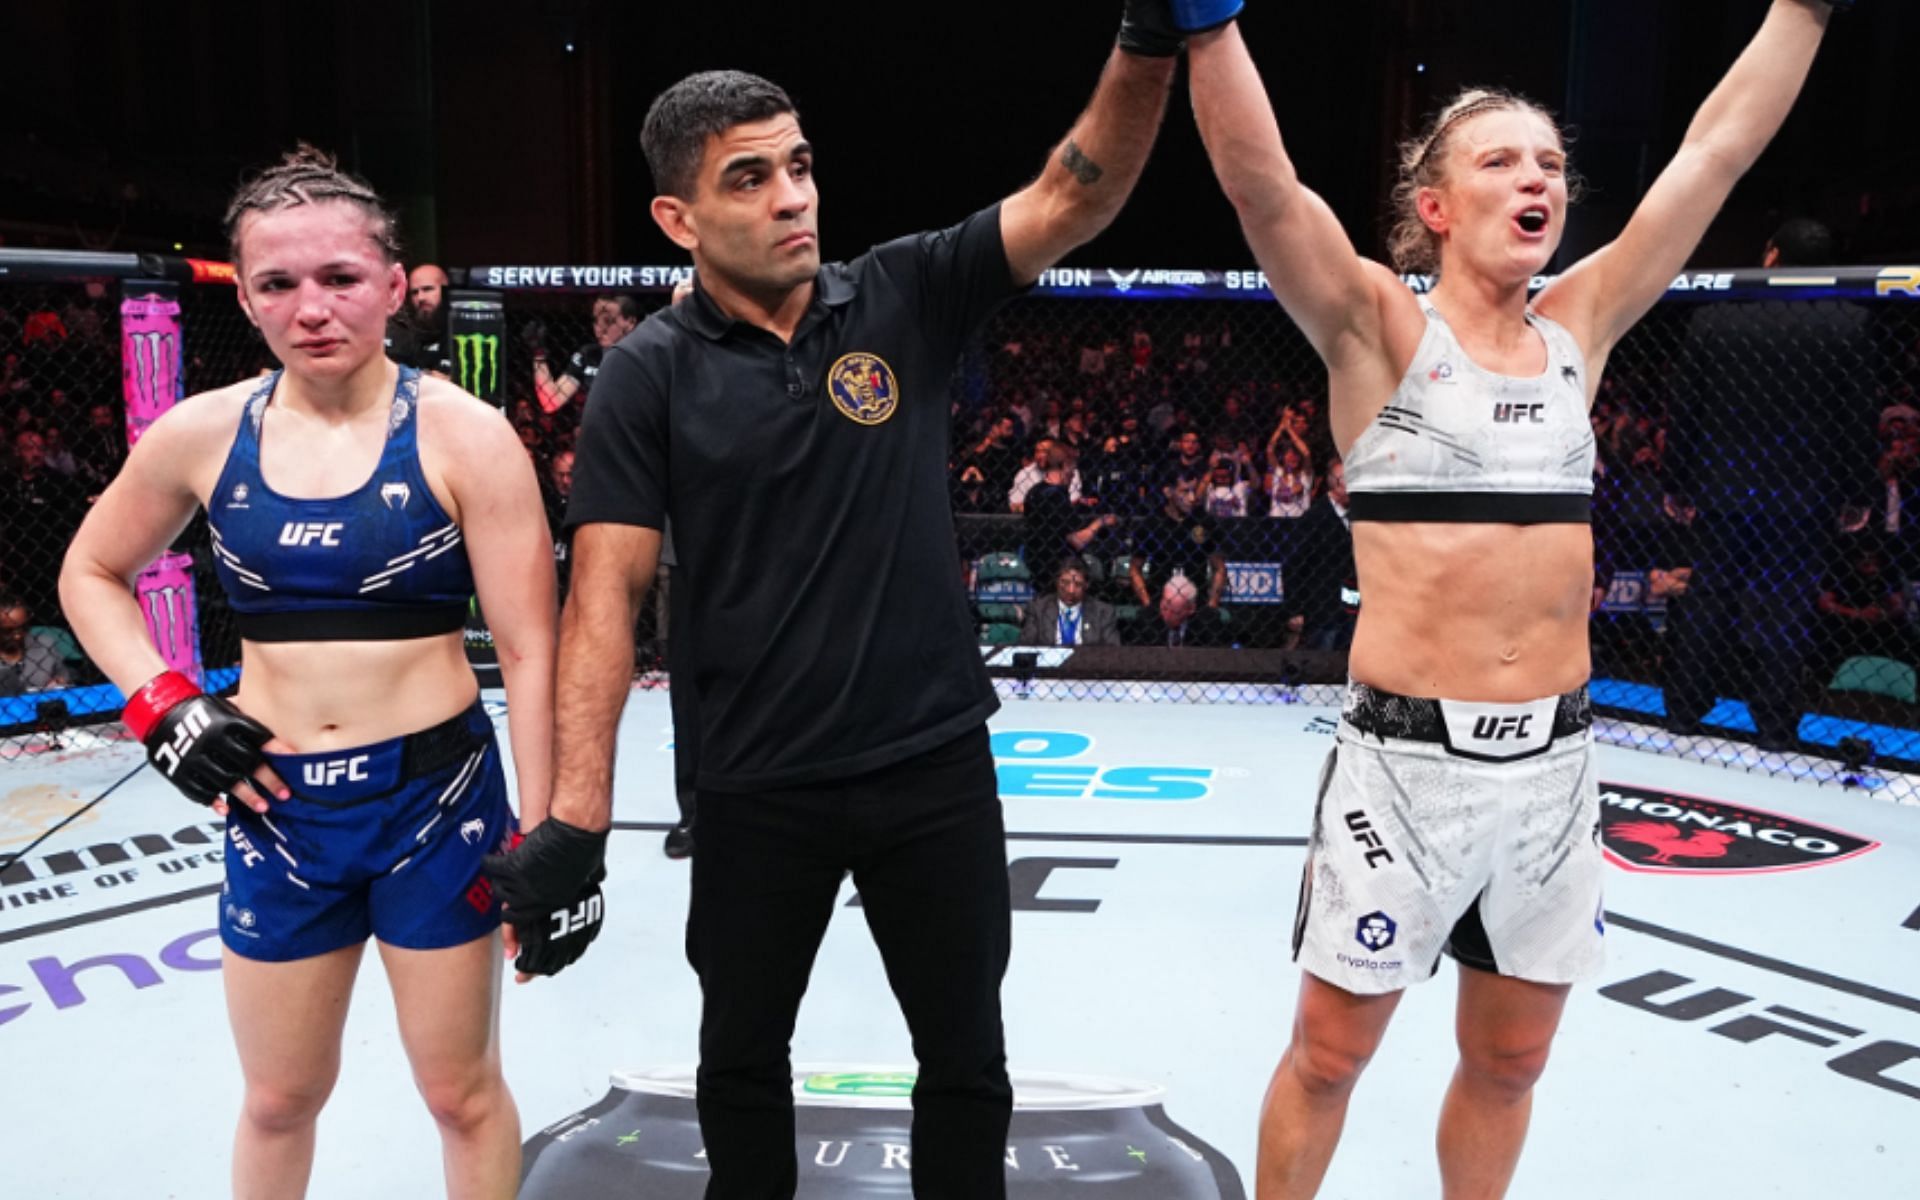 Erin Blanchfield (left) speaks out after losing to Manon Fiorot (right) at UFC Atlantic City [Image Courtesy: @ufceurope on X]